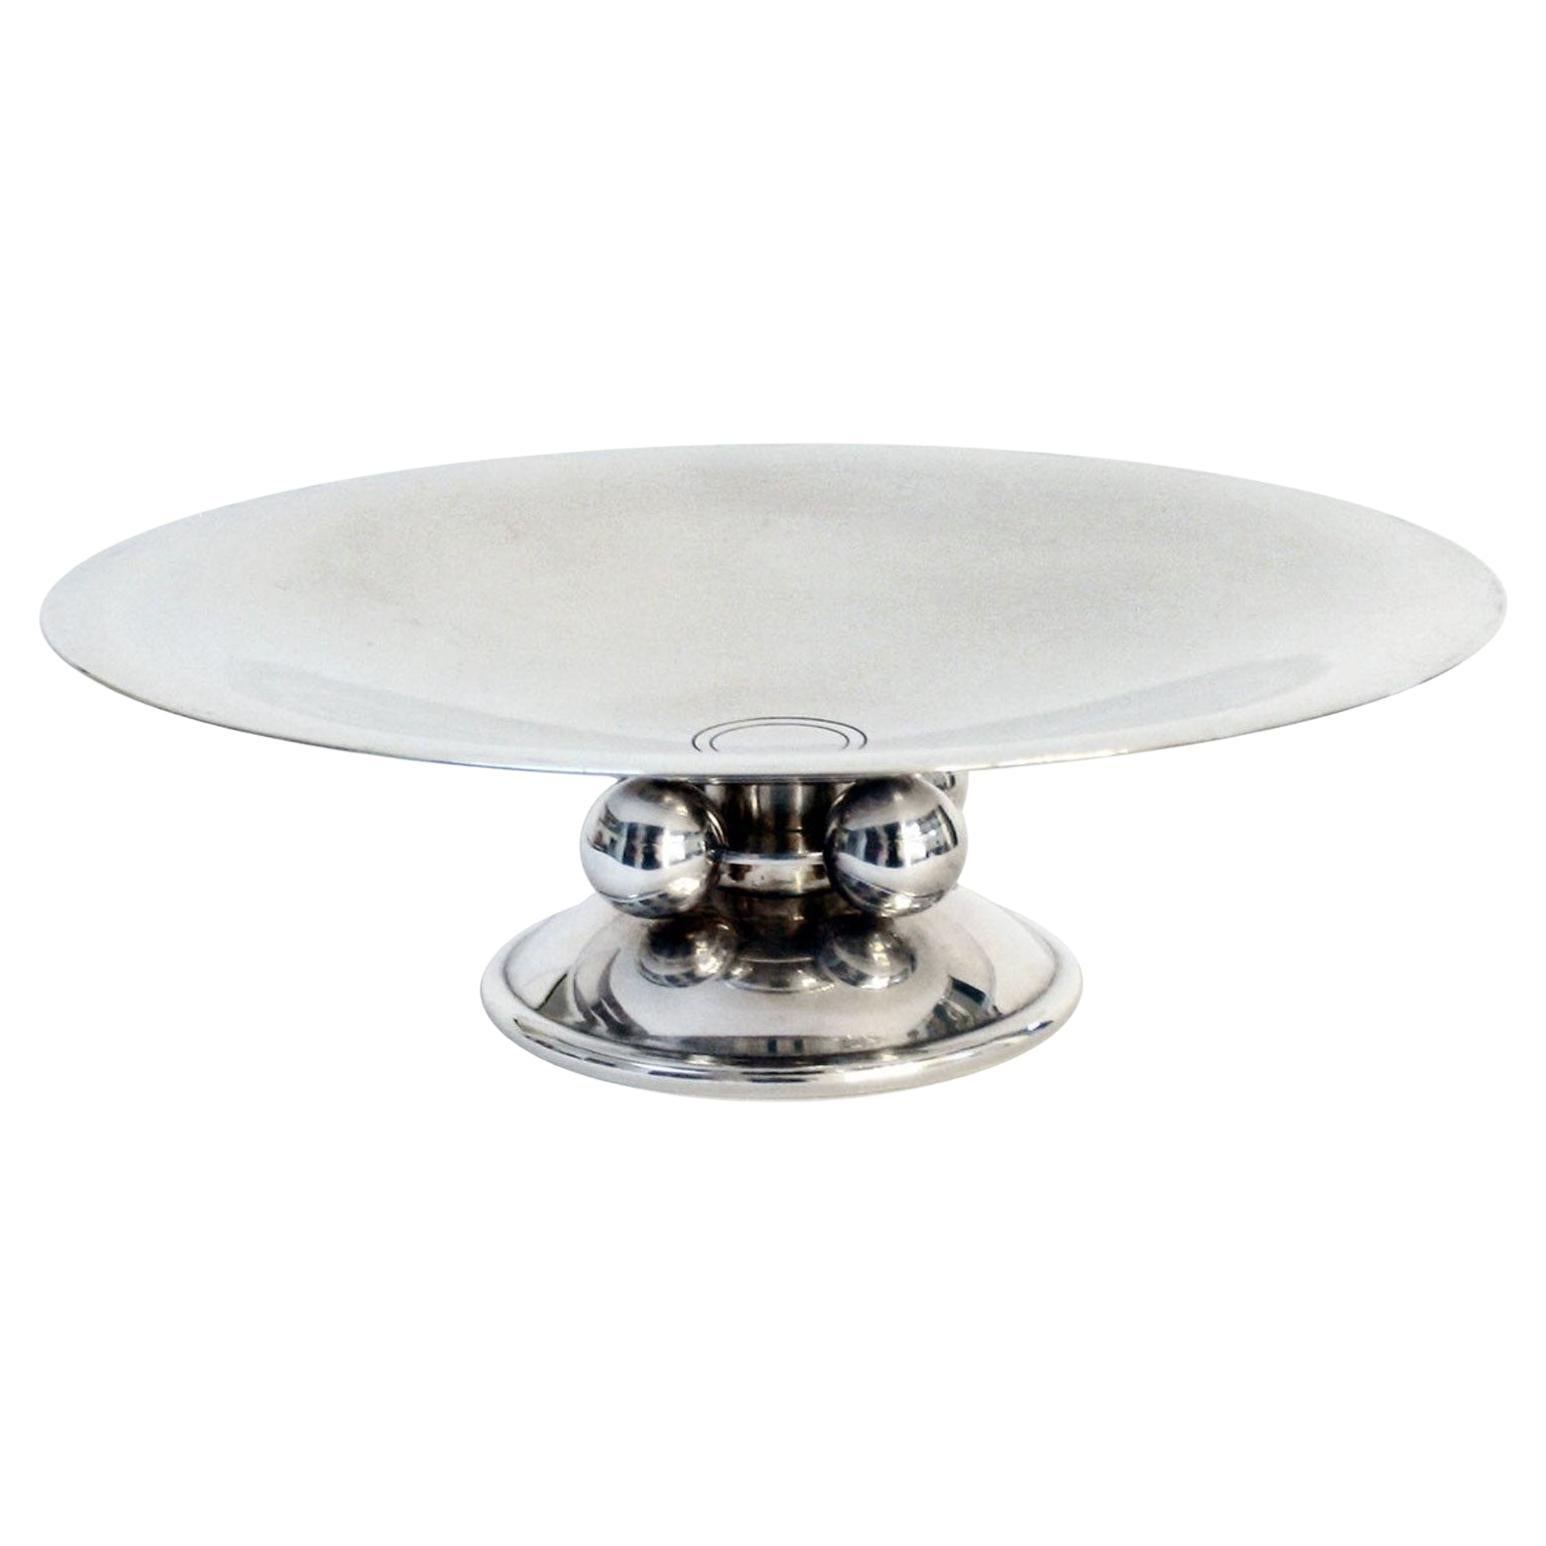 Christofle Antique Christofle Silver Plated Dessert Cake Stand Tazza Table Centrepiece Tray 